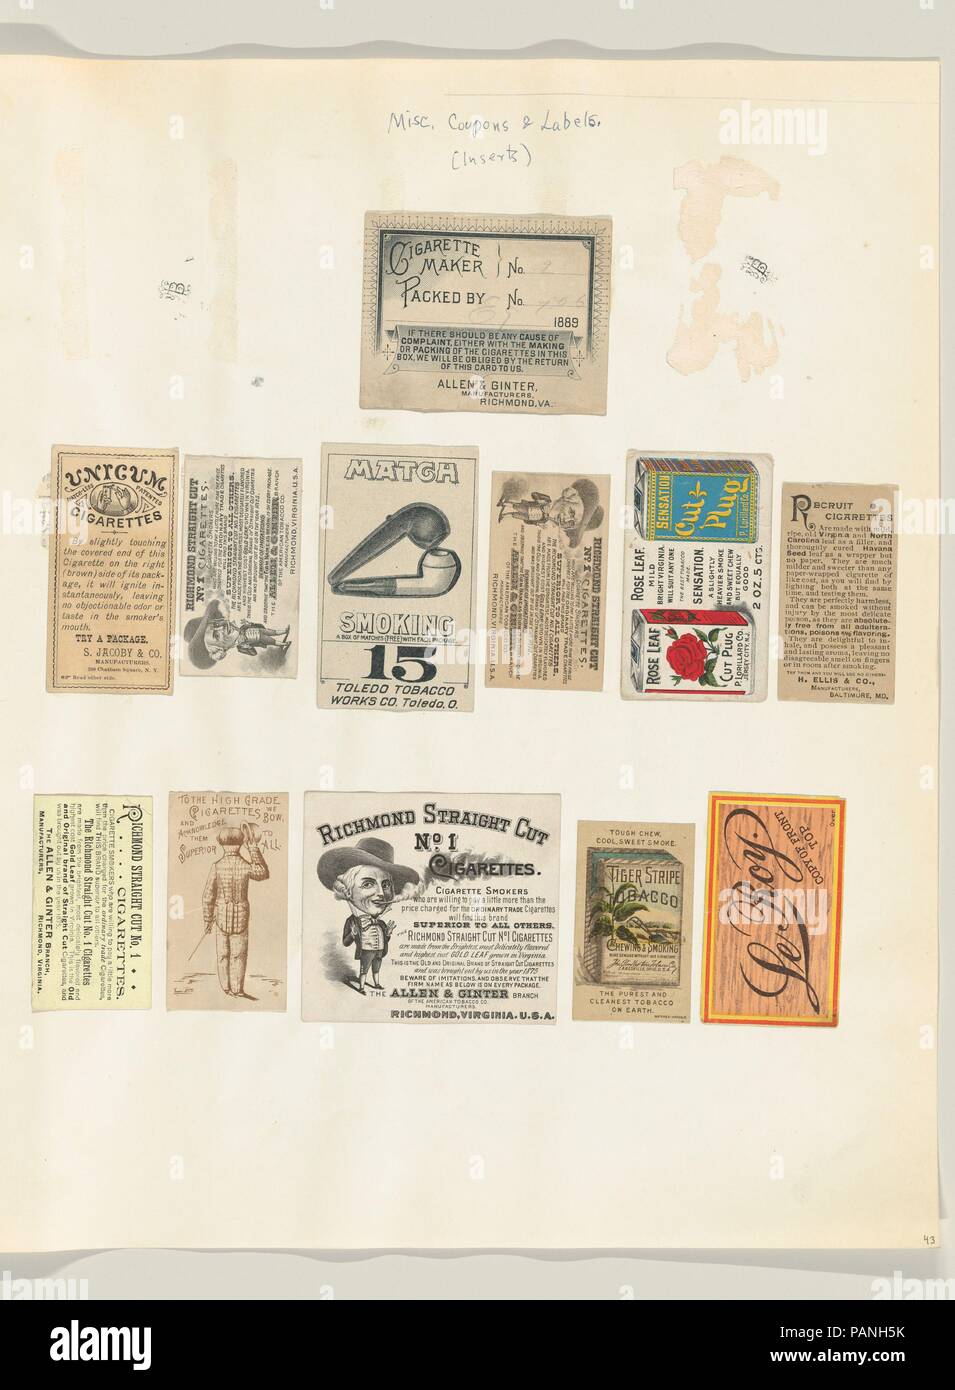 Album page with twelve tobacco coupons and labels. Dimensions: Sheet: 15 in. × 12 1/2 in. (38.1 × 31.8 cm). Date: ca. 1888.  Album page containing twelve miscellaneous tobacco coupons and labels, including brands such as Allen & Ginter, Toledo Tobacco Works Co., P. Lorillard Co., S. Jacoby & Co., H. Ellis & Co., and The Pinkerton Tobacco Co. Museum: Metropolitan Museum of Art, New York, USA. Stock Photo